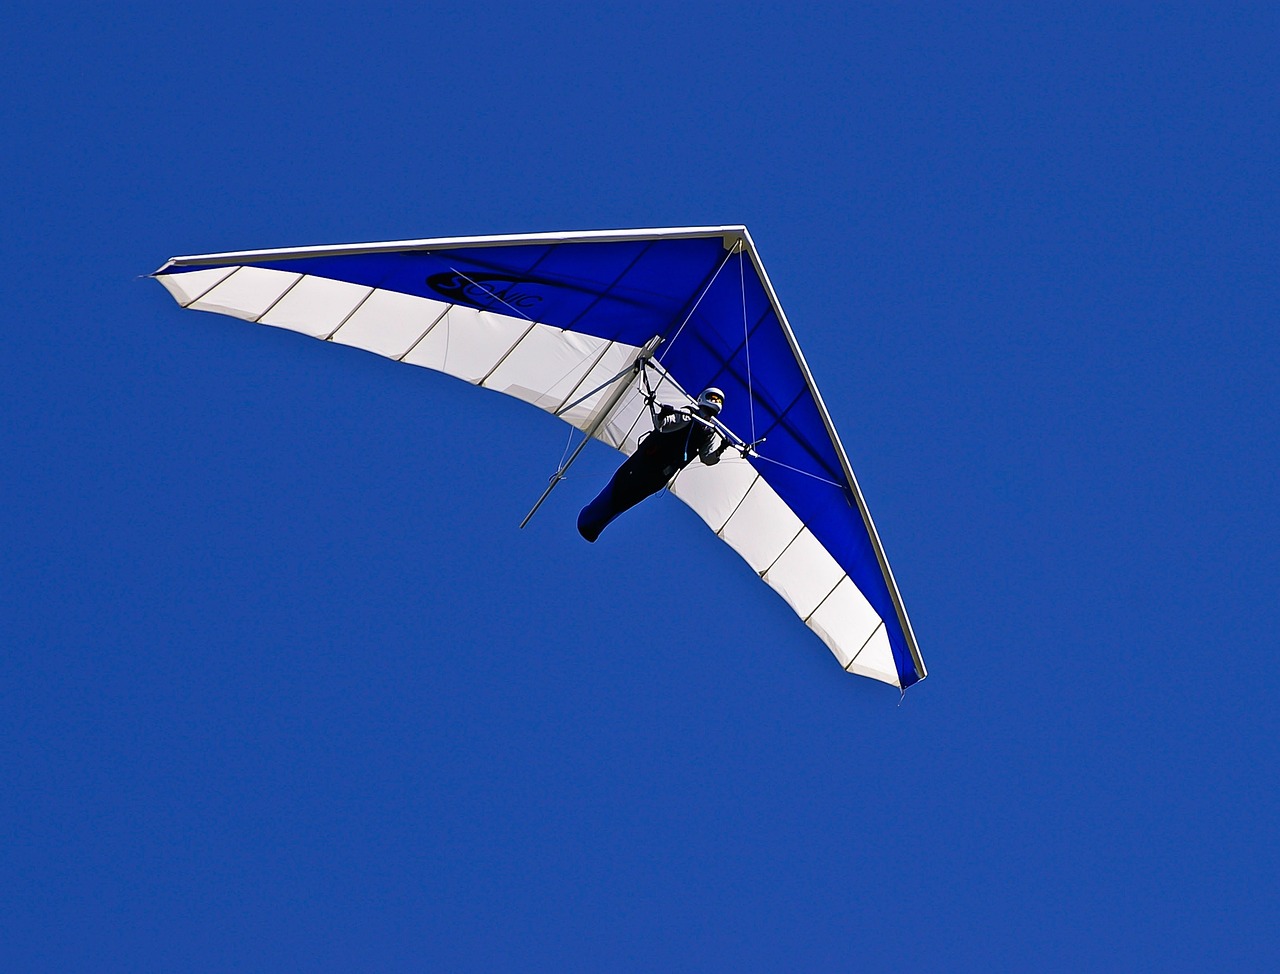 20 Fun Facts About Hang Gliding